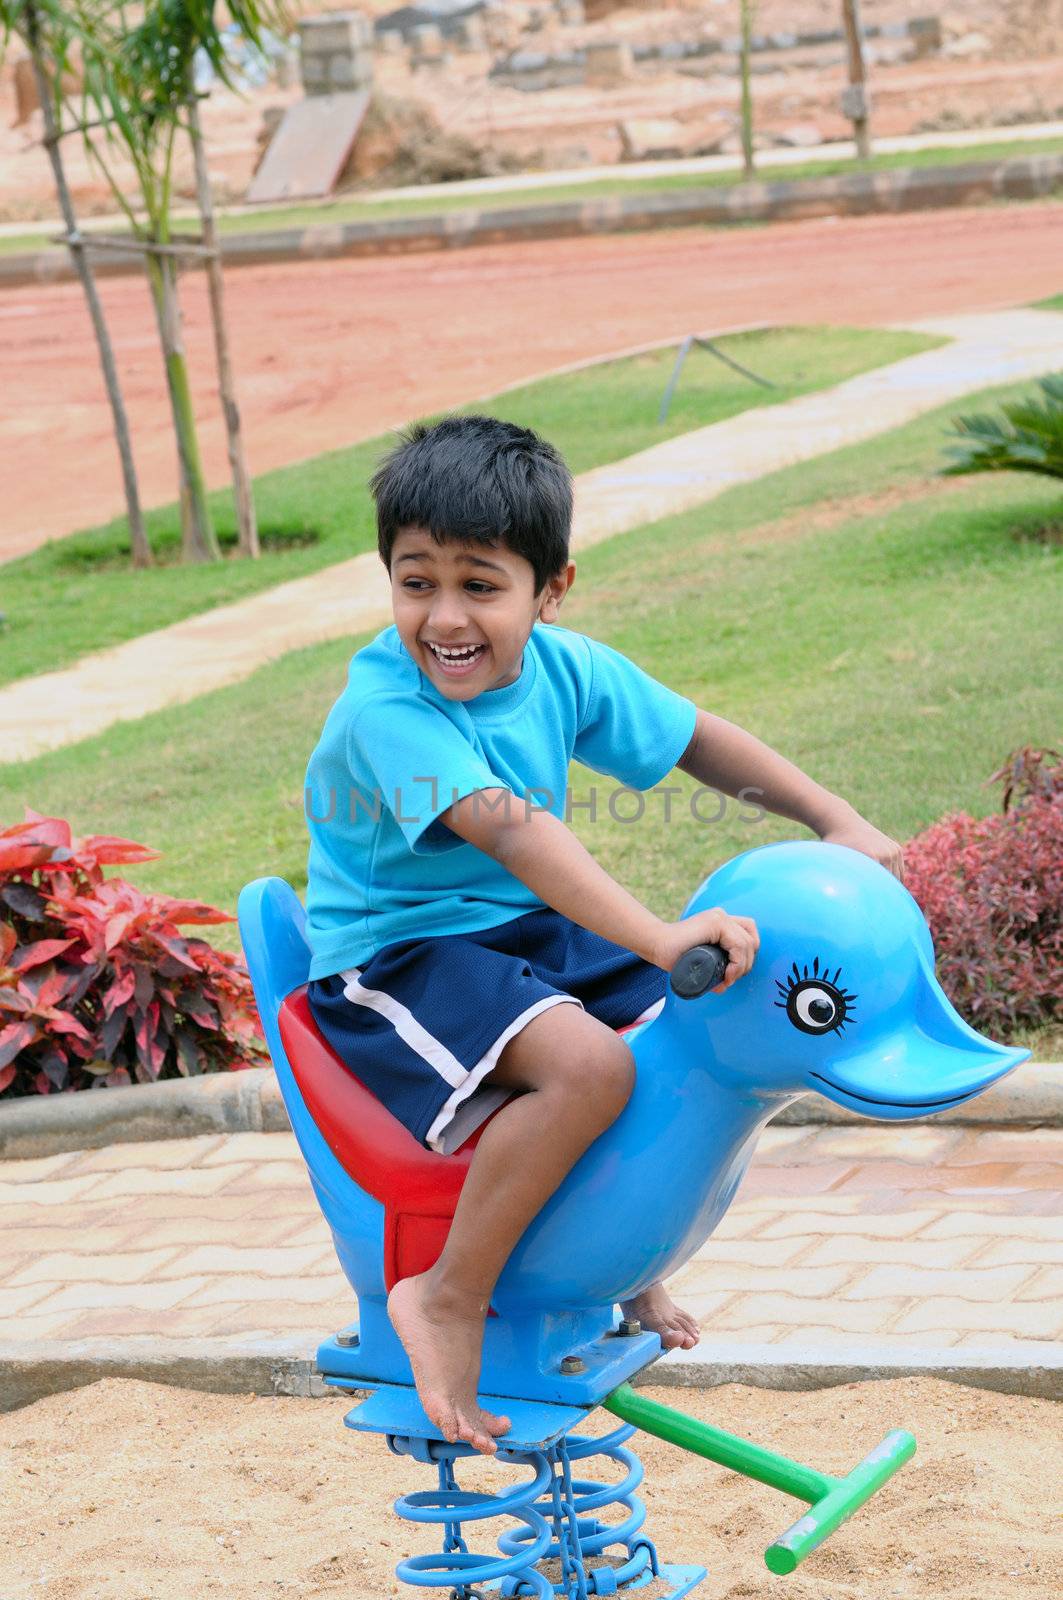 An handsome Indian kid having funat a local park